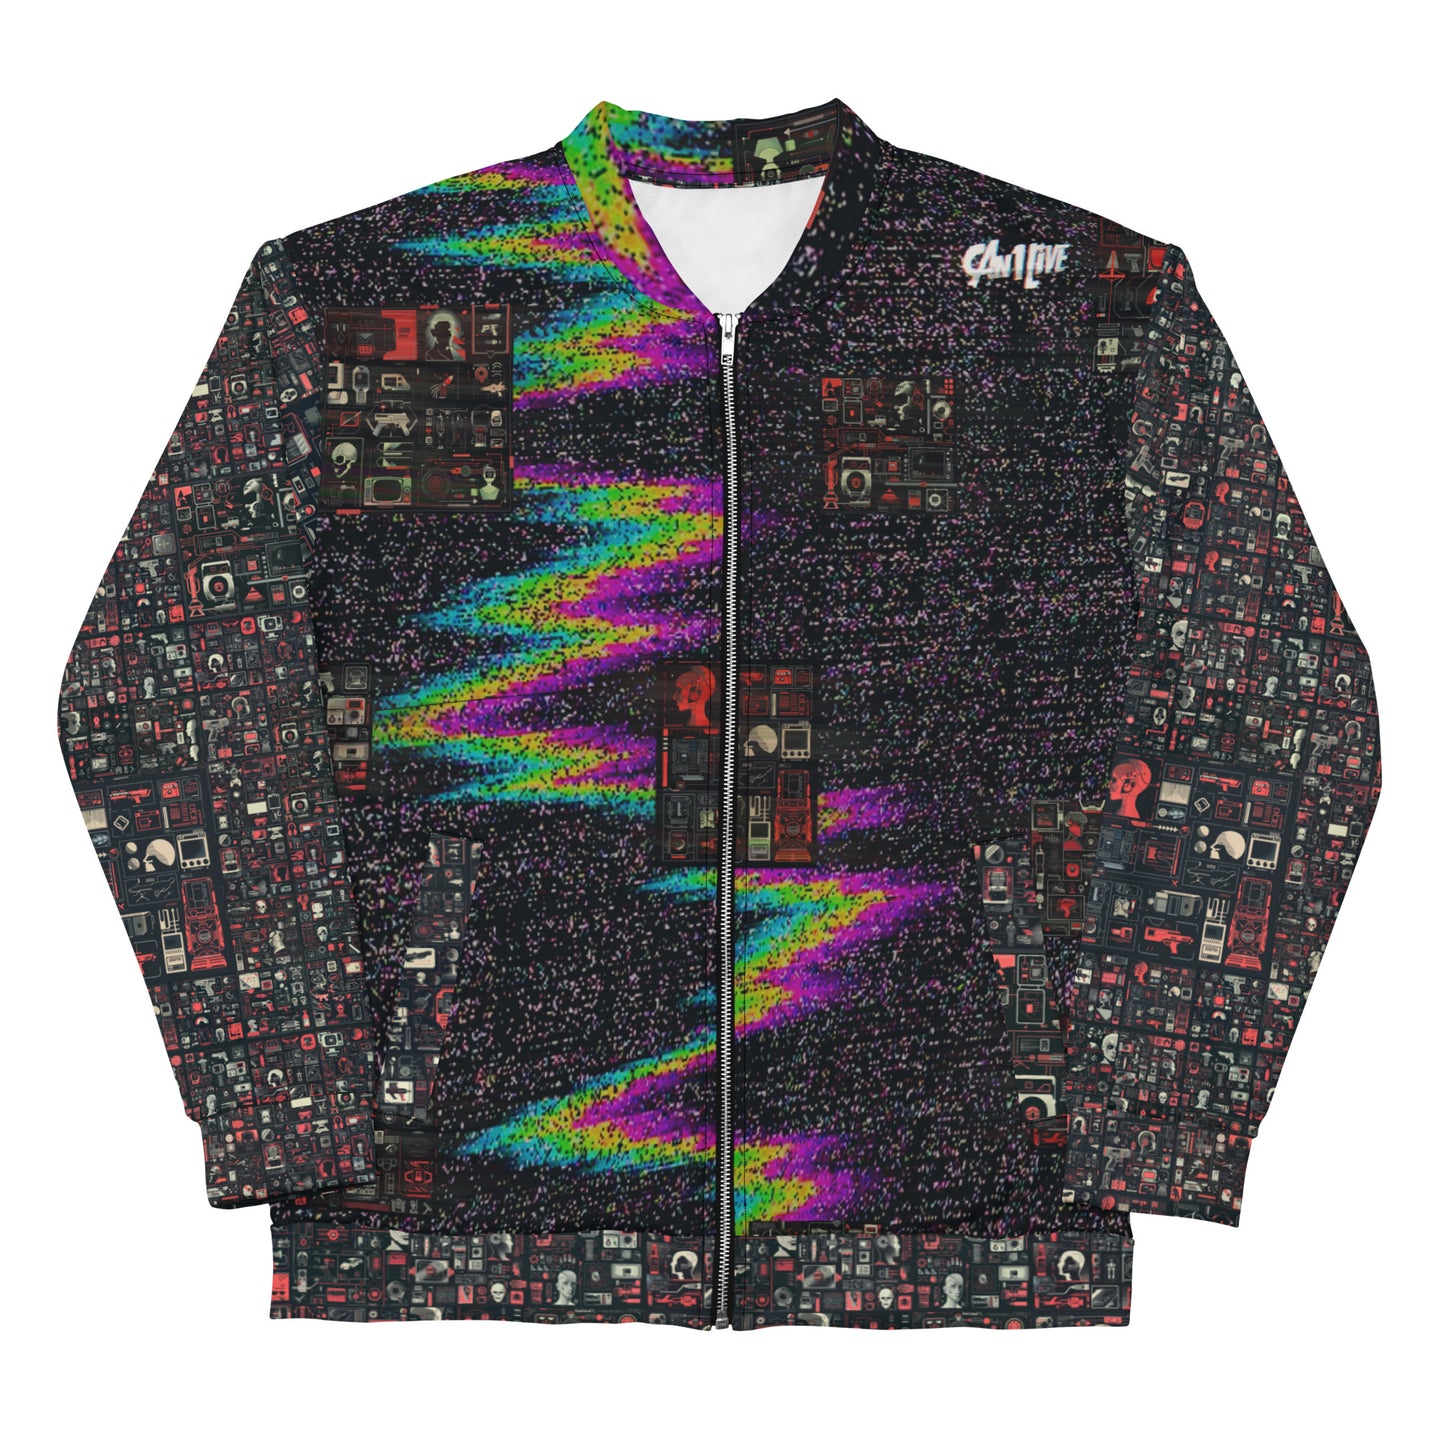 Can1live 'Will Not Be Televised' All-Over Print Bomber Jacket ...